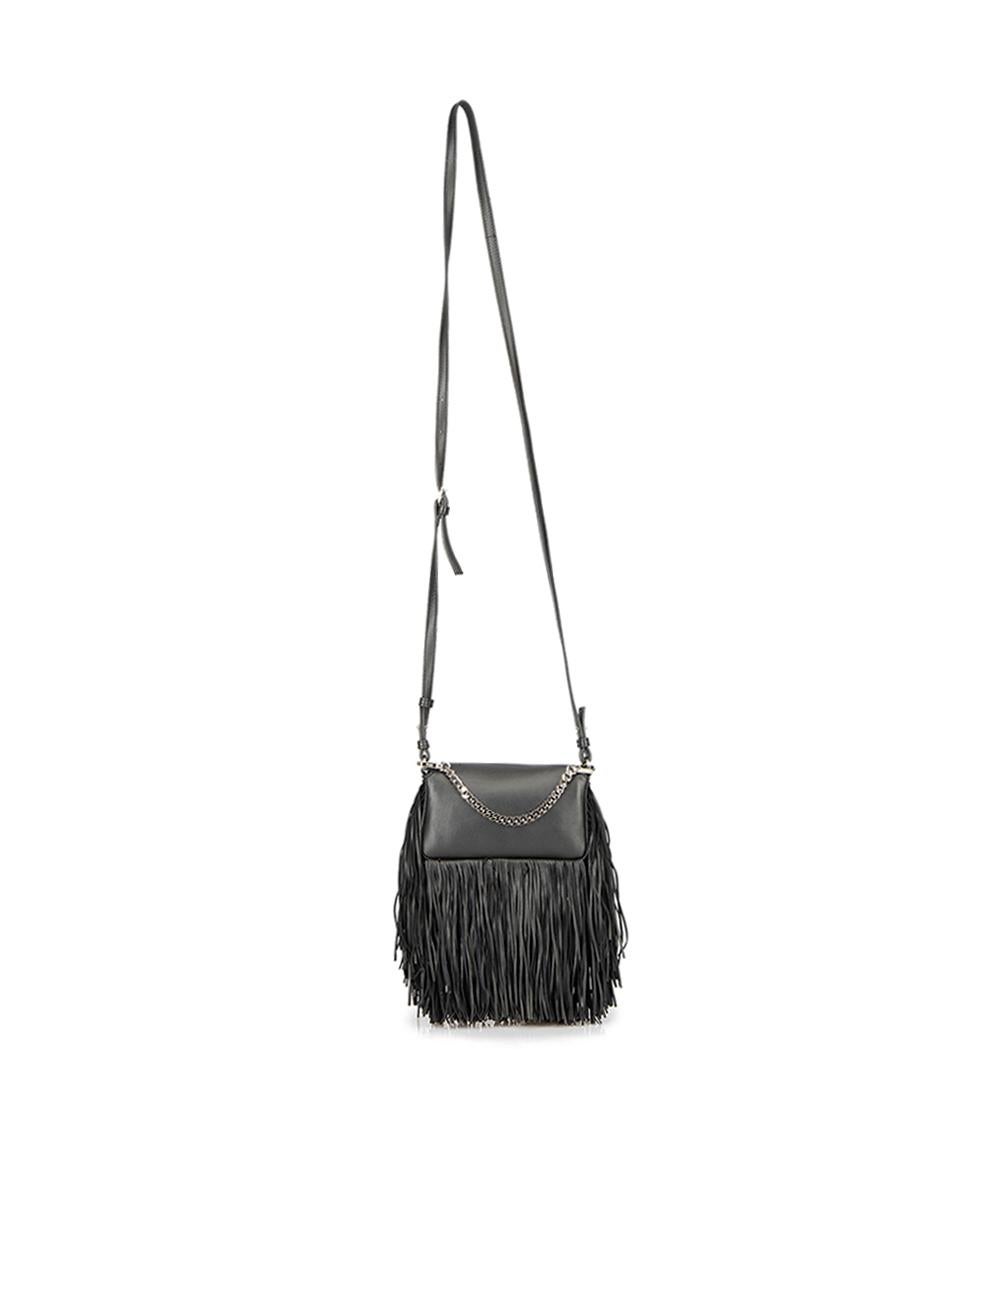 Fendi Women's Black Leather Fringe Monster Micro Baguette In Good Condition For Sale In London, GB